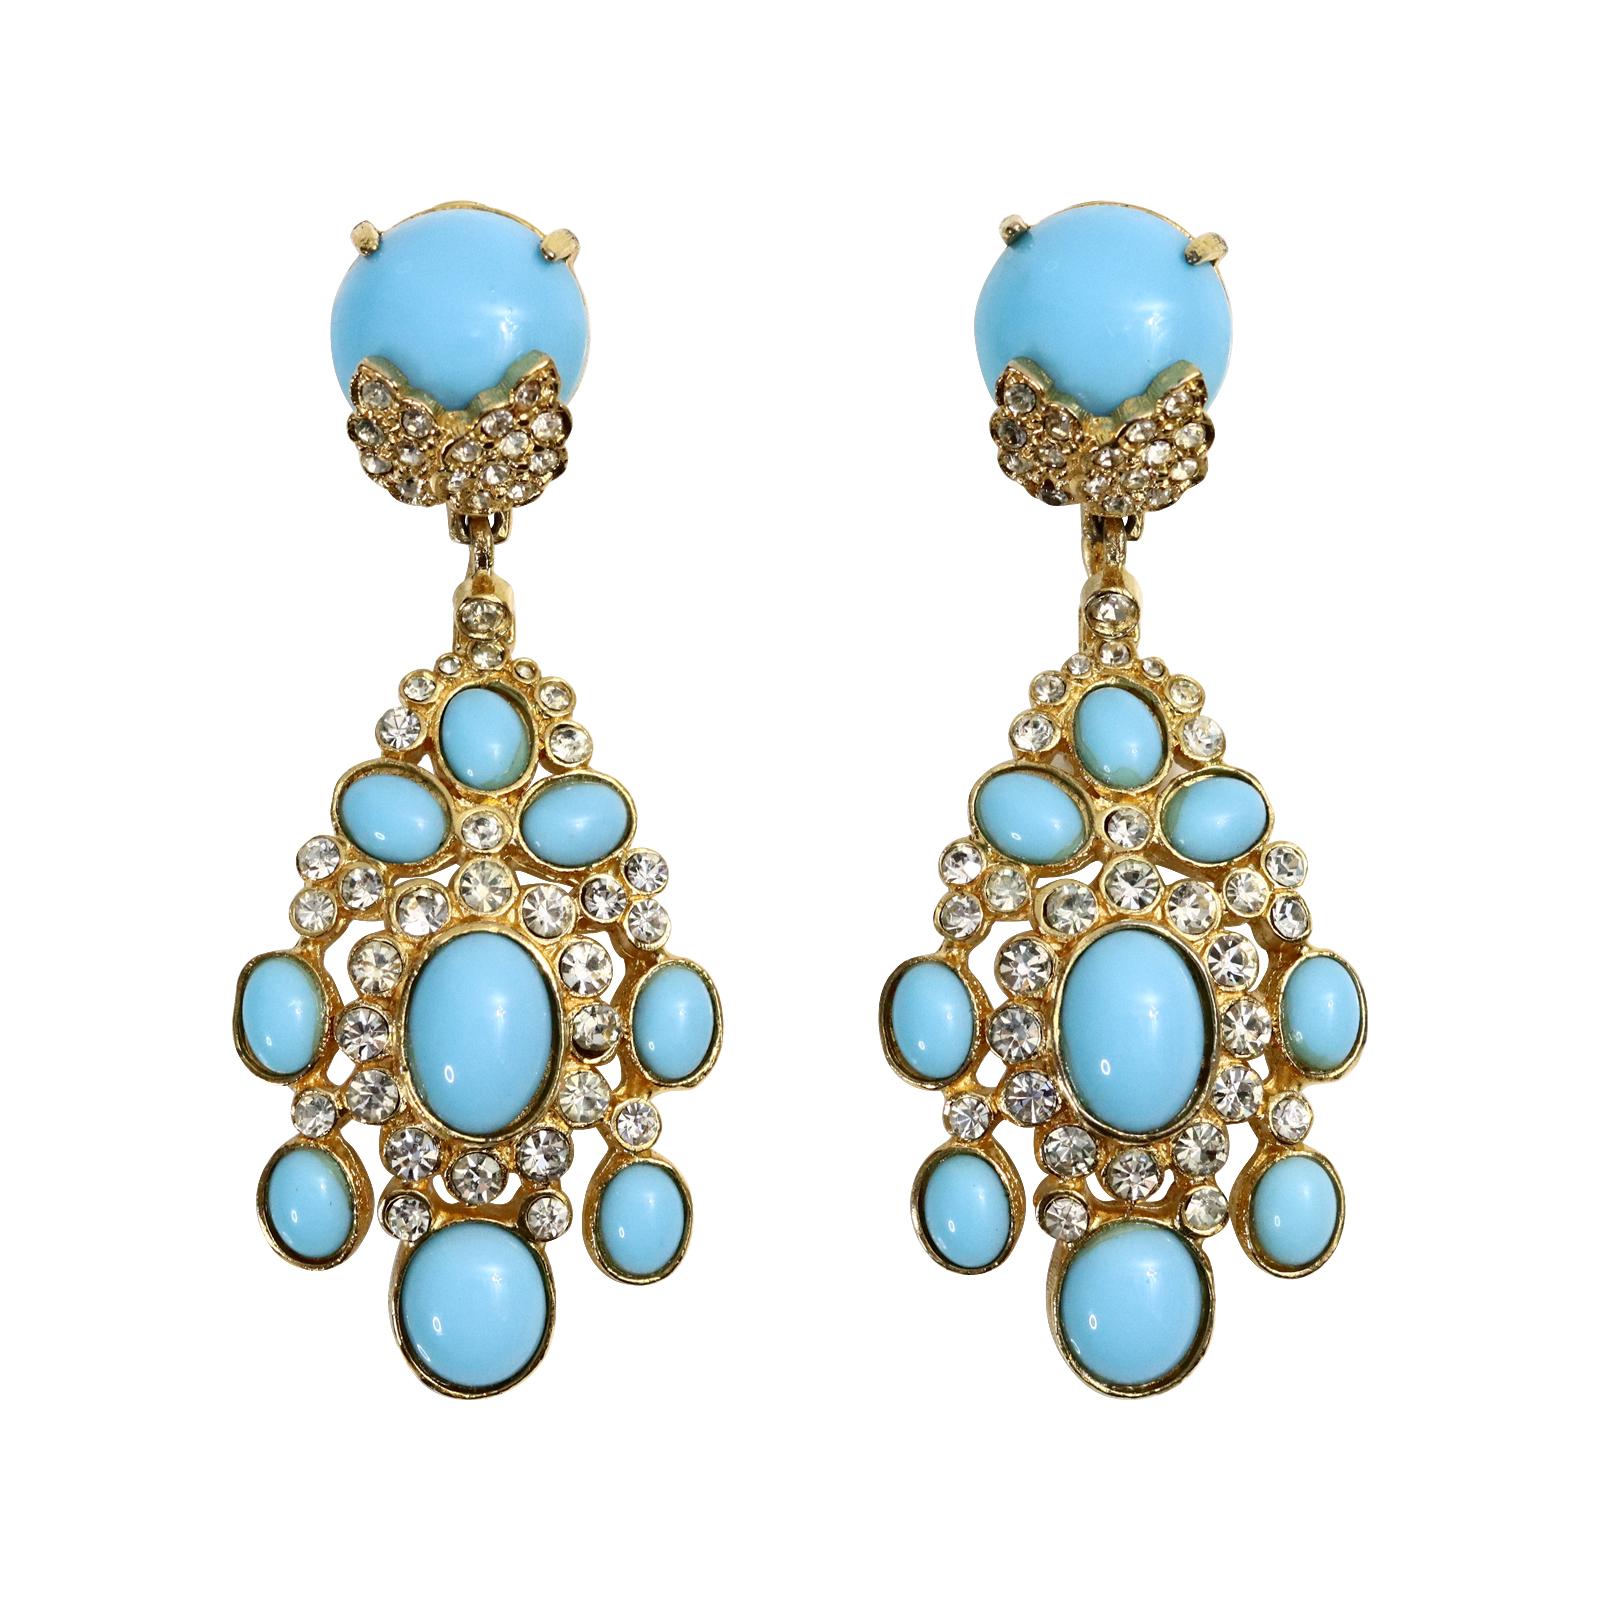 Vintage Cadoro Gold with Faux Turquoise Dangling Earrings Circa 1980s For Sale 1